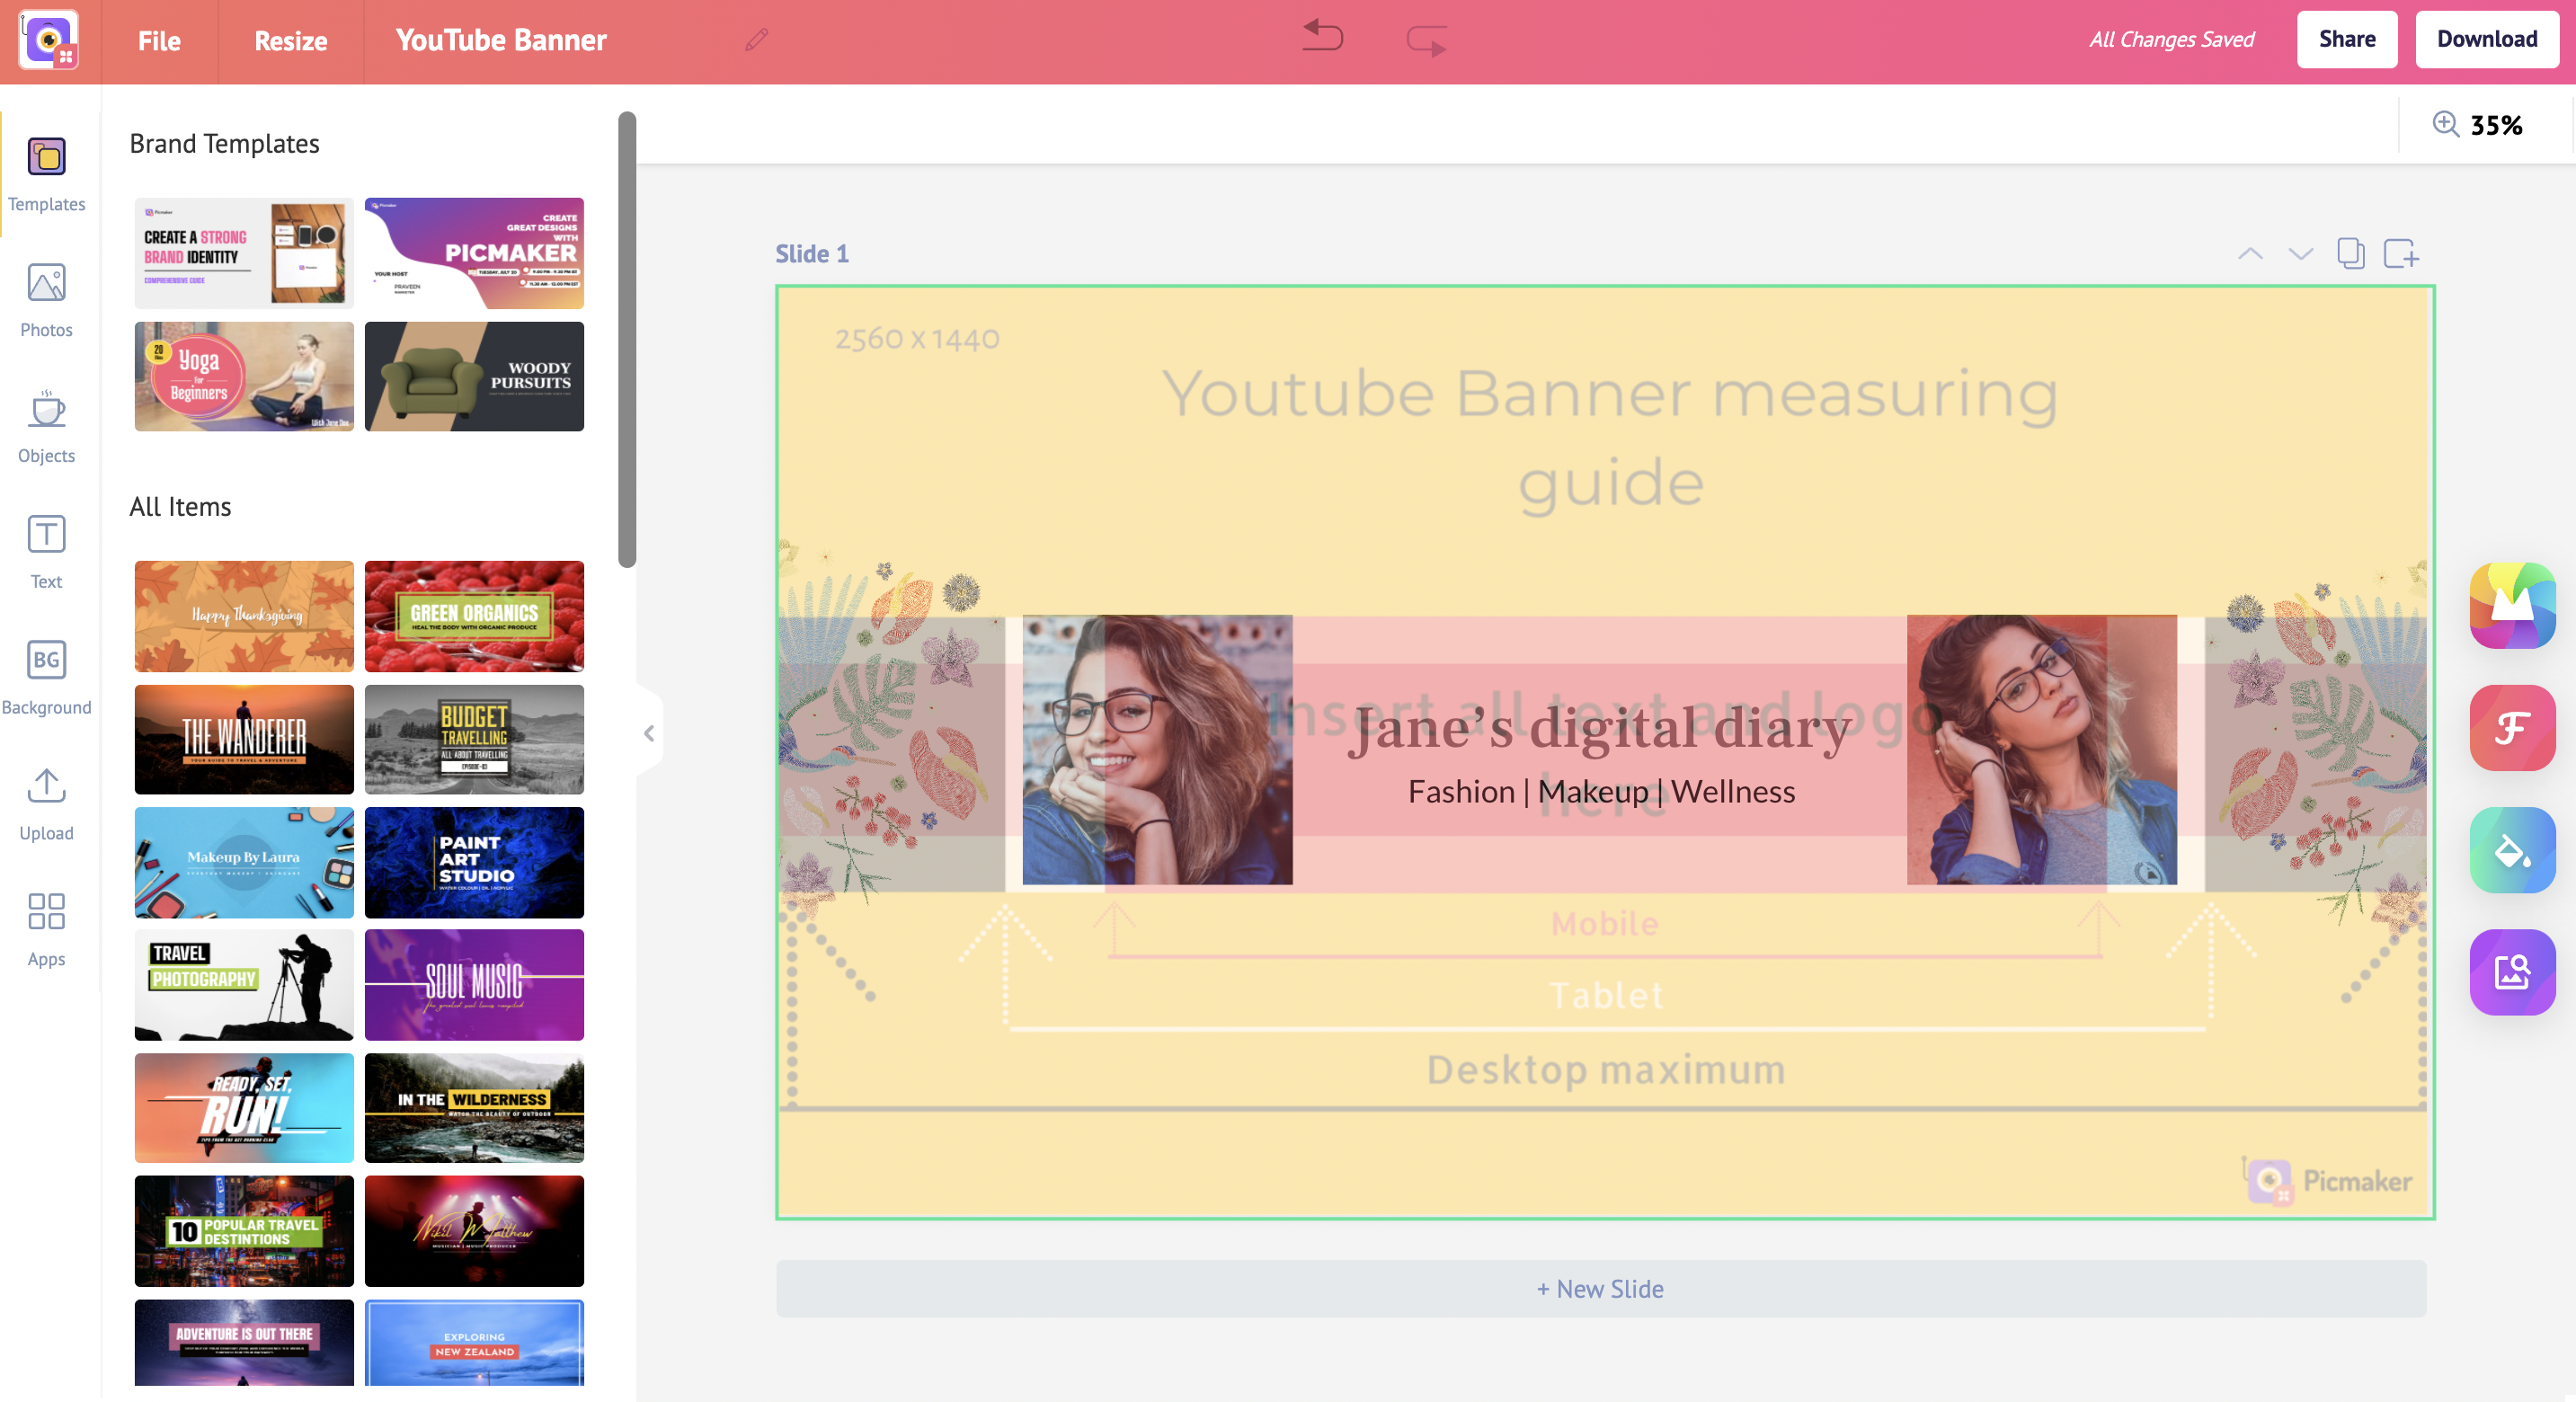 Customise the template using the YouTube measuring guide